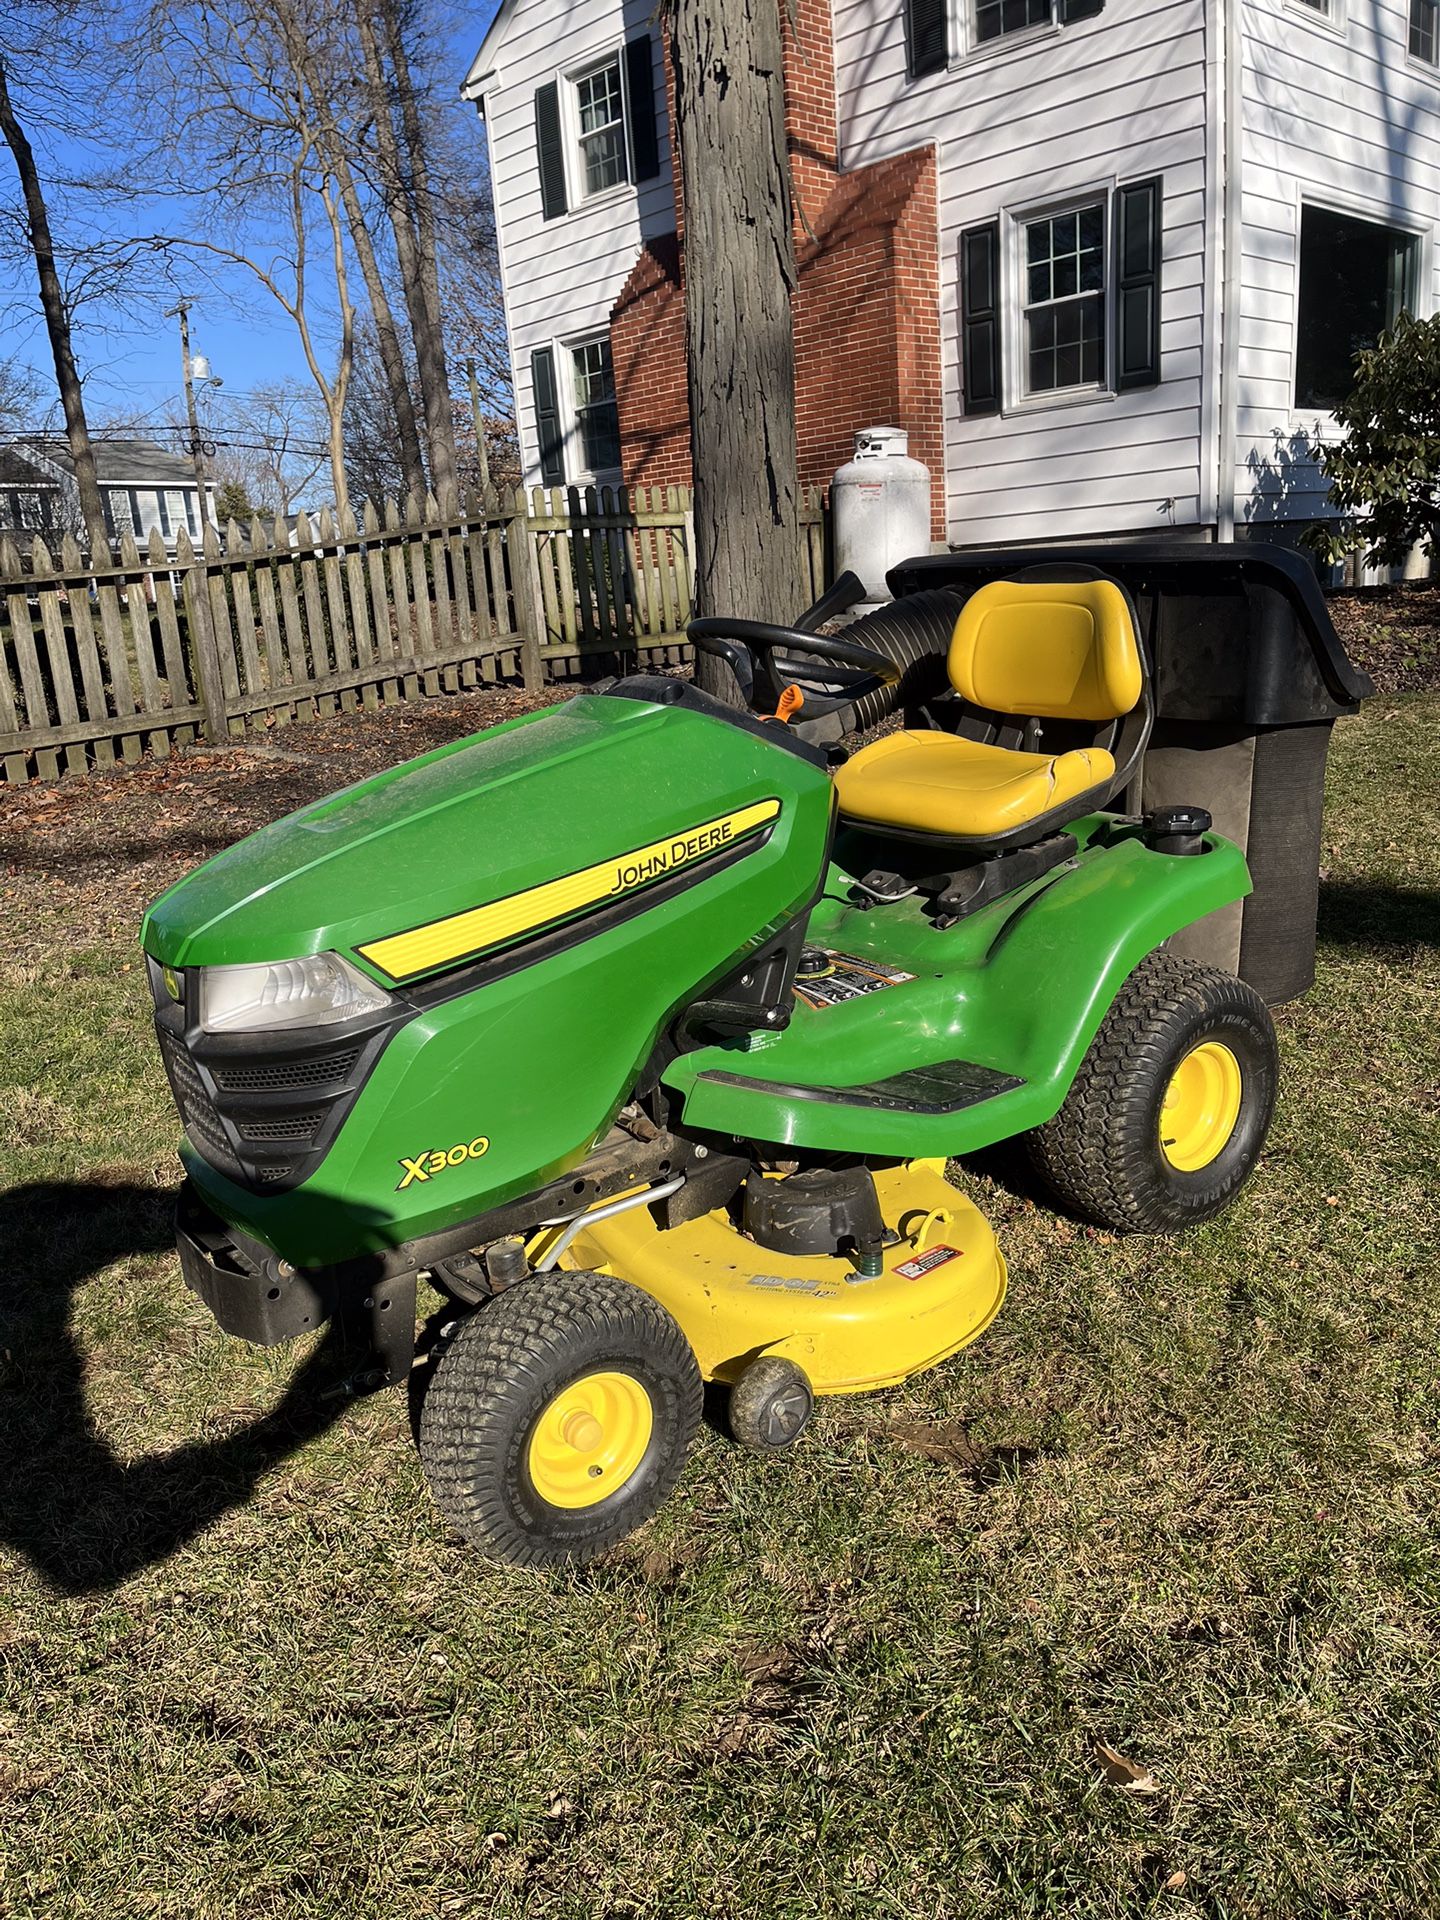 2014 John Deere X300 Lawn Tractor With Bagger